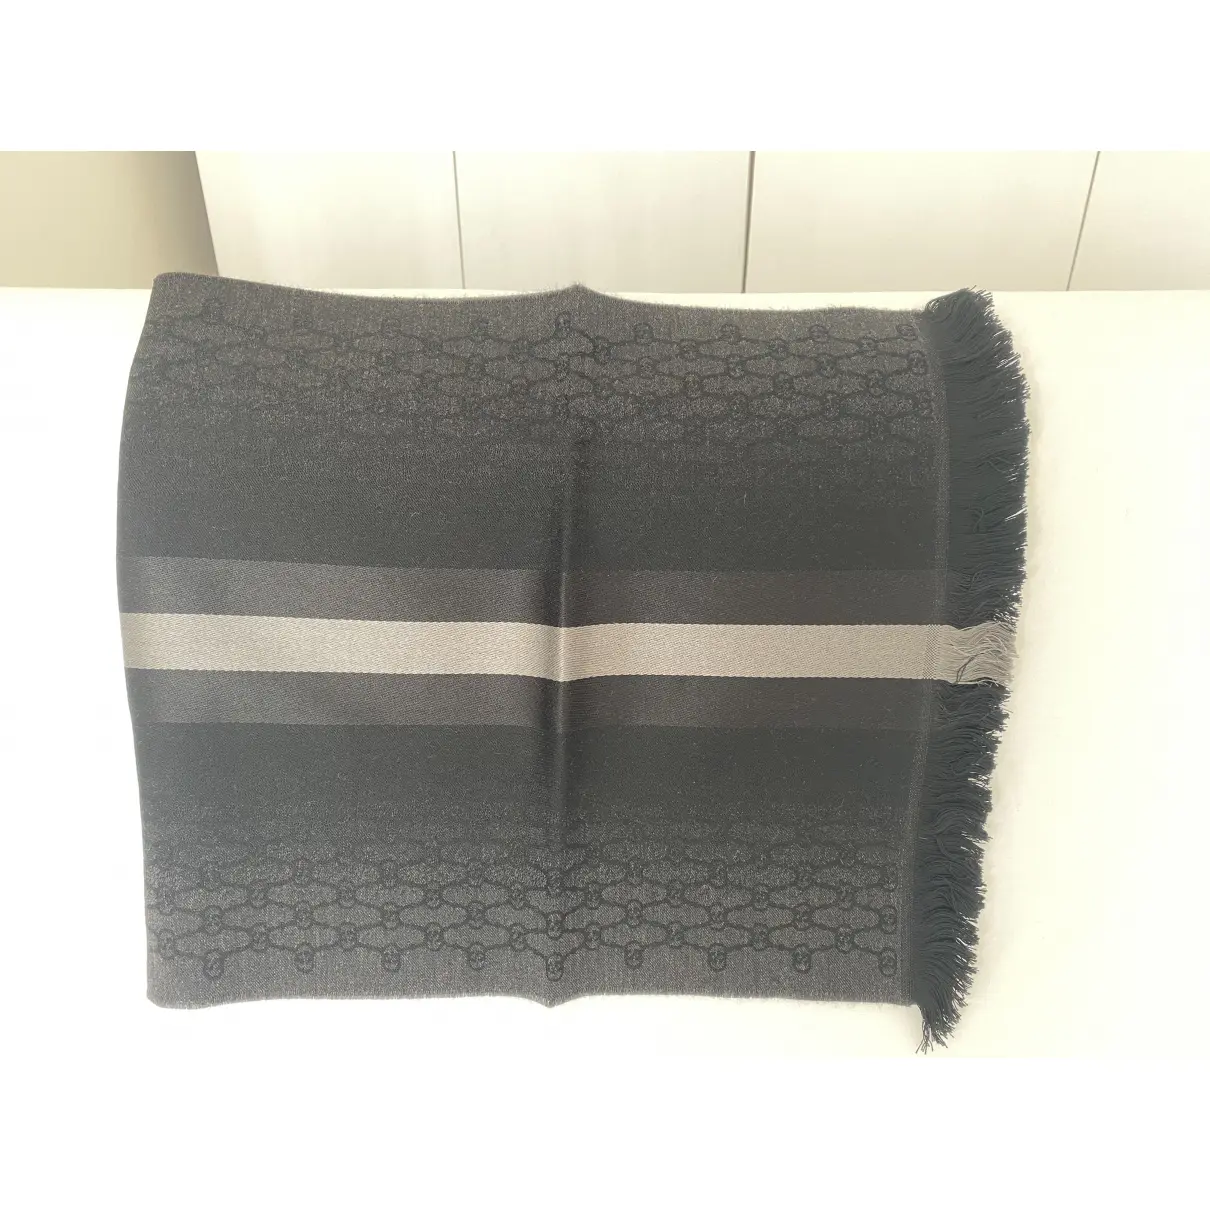 Buy Gucci Wool scarf & pocket square online